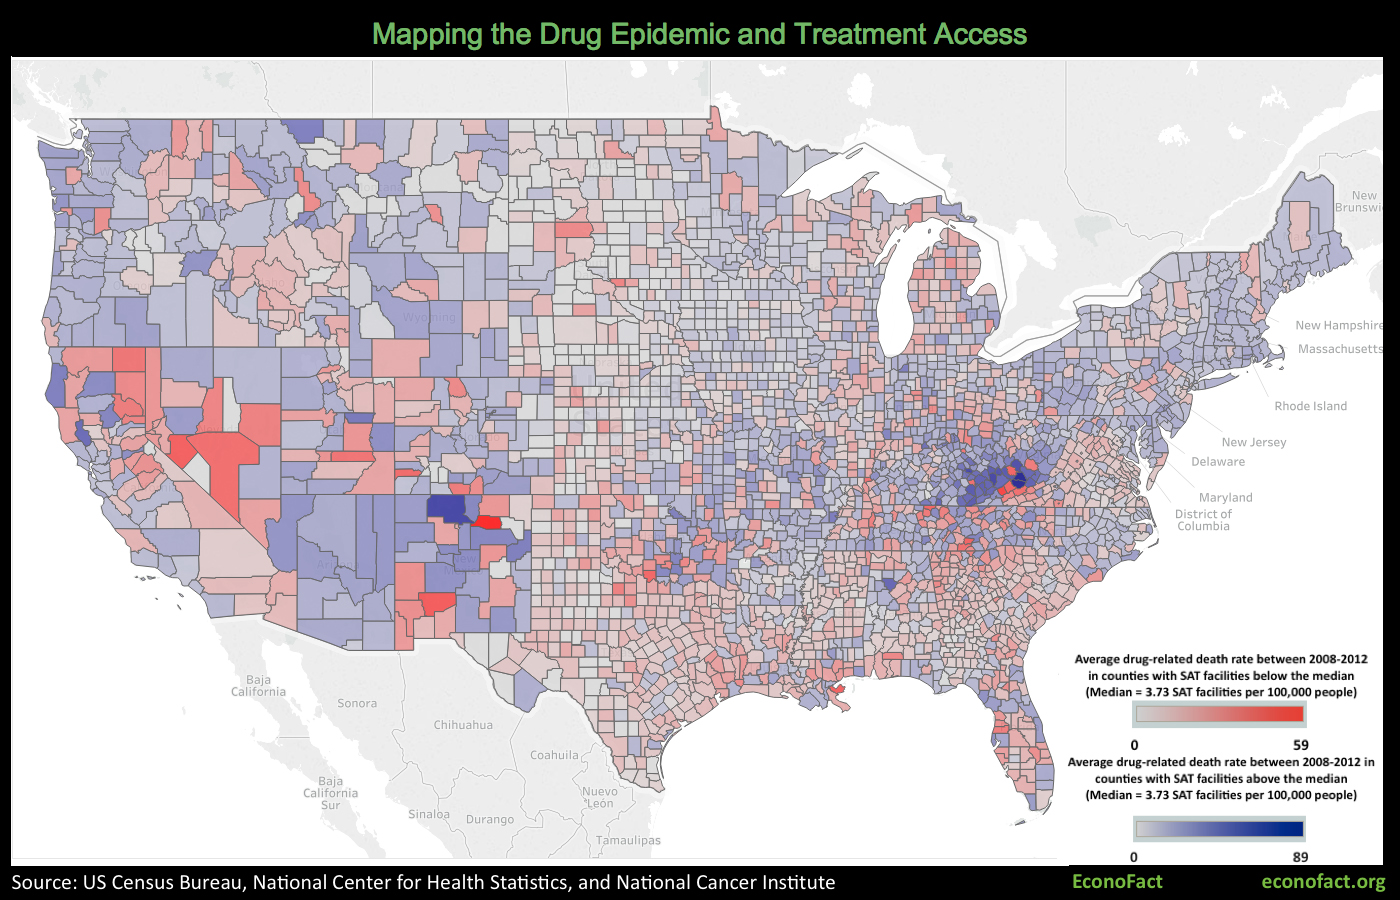 Mapping the Drug Epidemic and Treatment Access